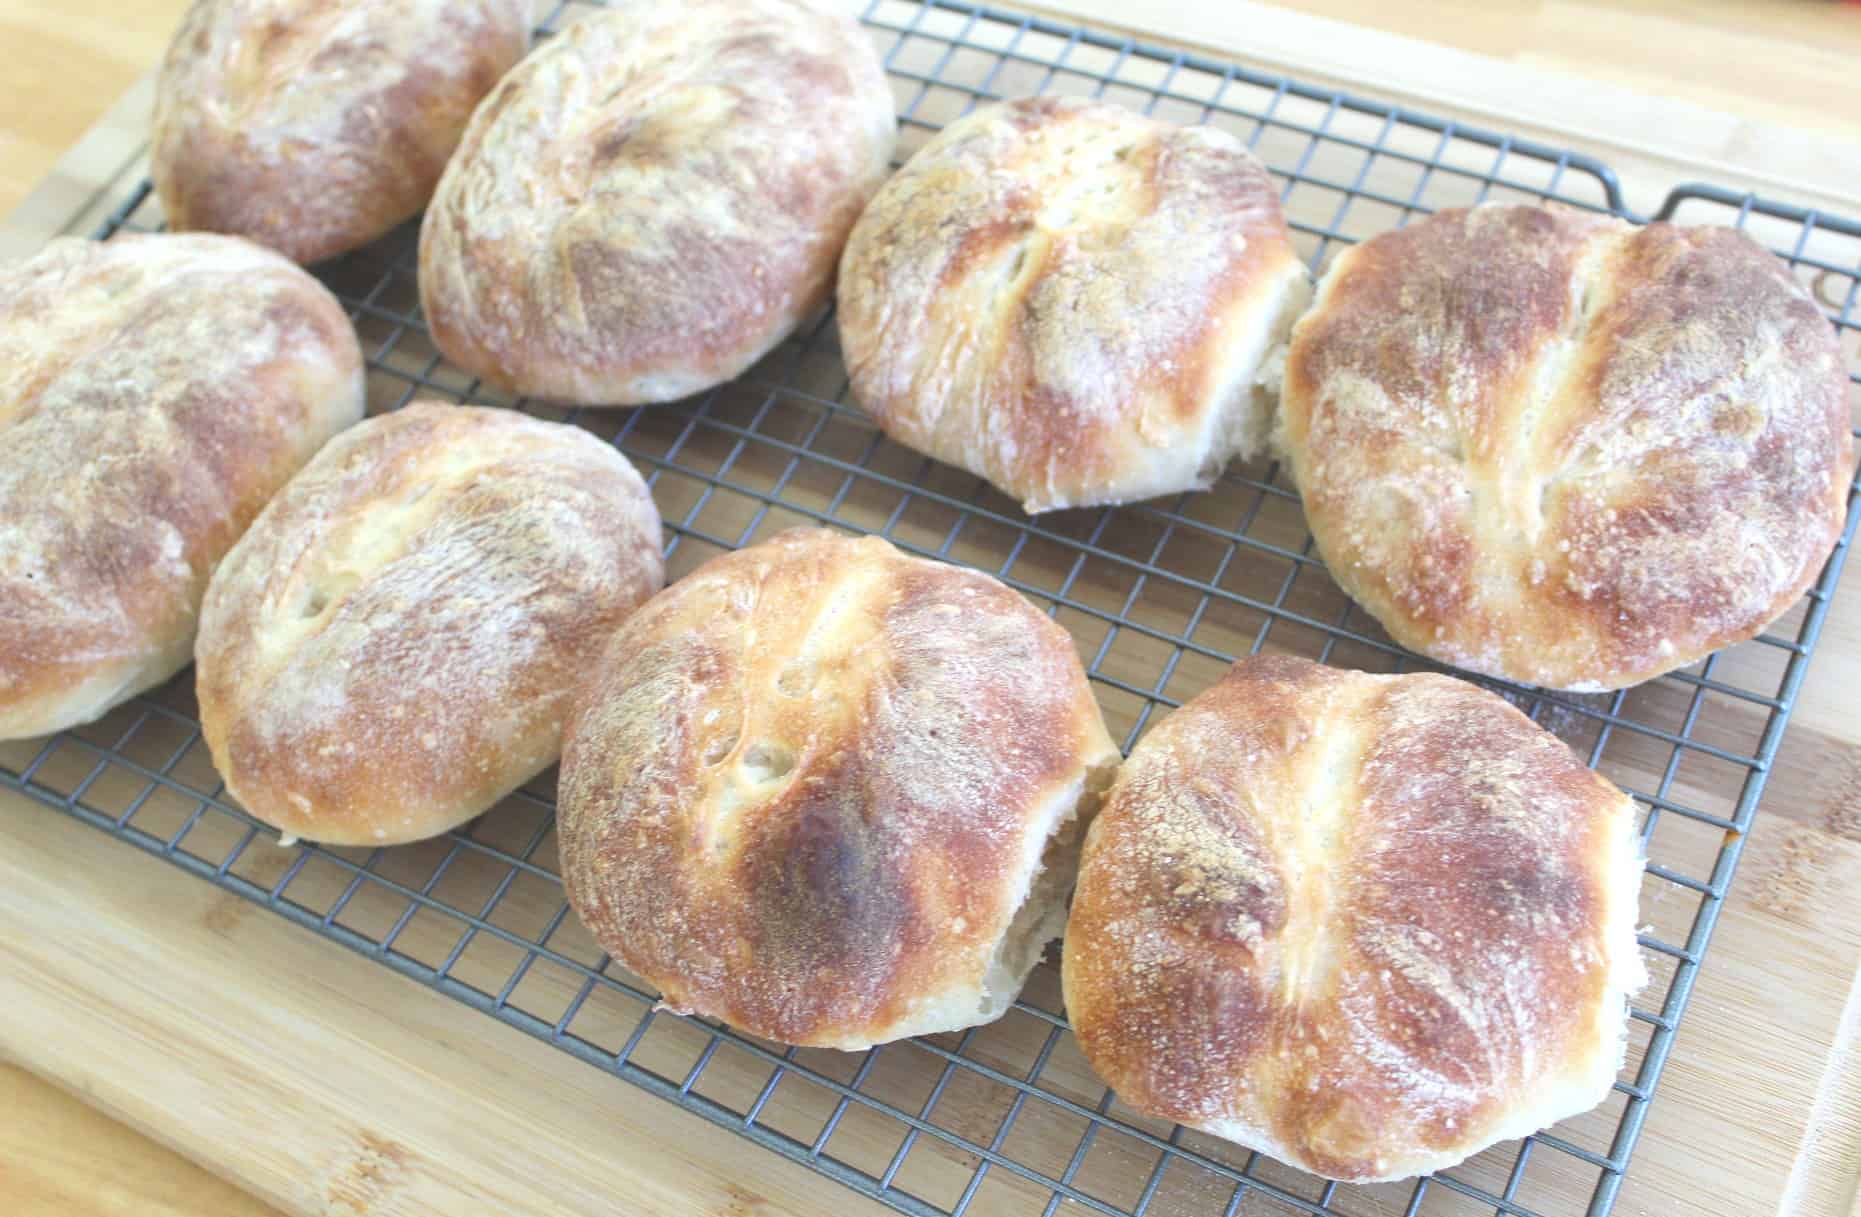 8 freshly baked breads in the cooling rack. They look uneven but with a beautiful baked crust.